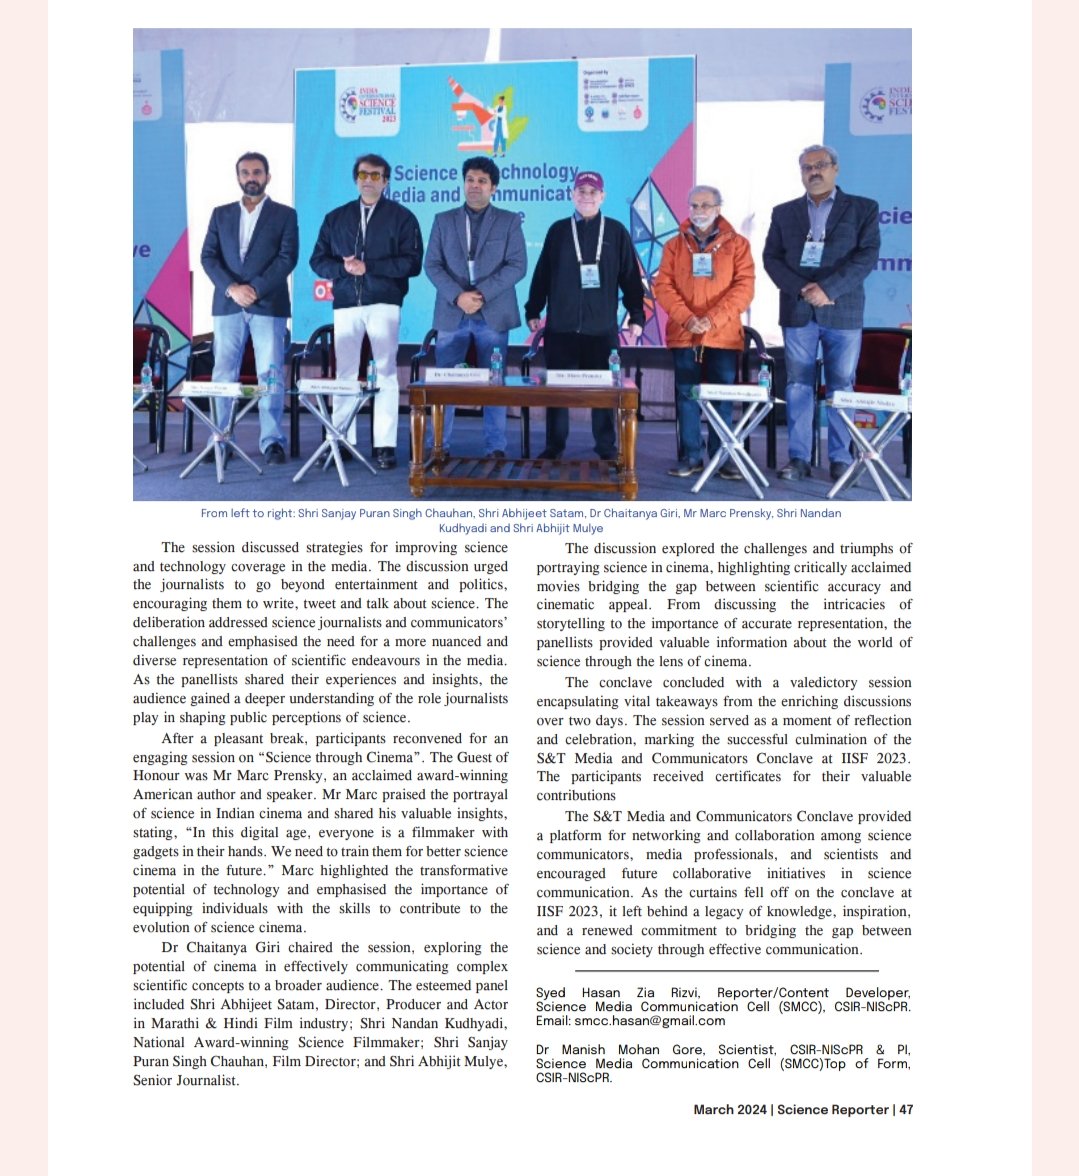 A report on S&T Media and Communicators Conclave of #IISF2023 has published in popular magazine 'Science Reporter' @ScienceReporte1 To read, pls click the link: nopr.niscpr.res.in/handle/1234567… @IndiaDST @CSIR_IND @nifindia @Vibha_India @iisfest @SMCC_NIScPR